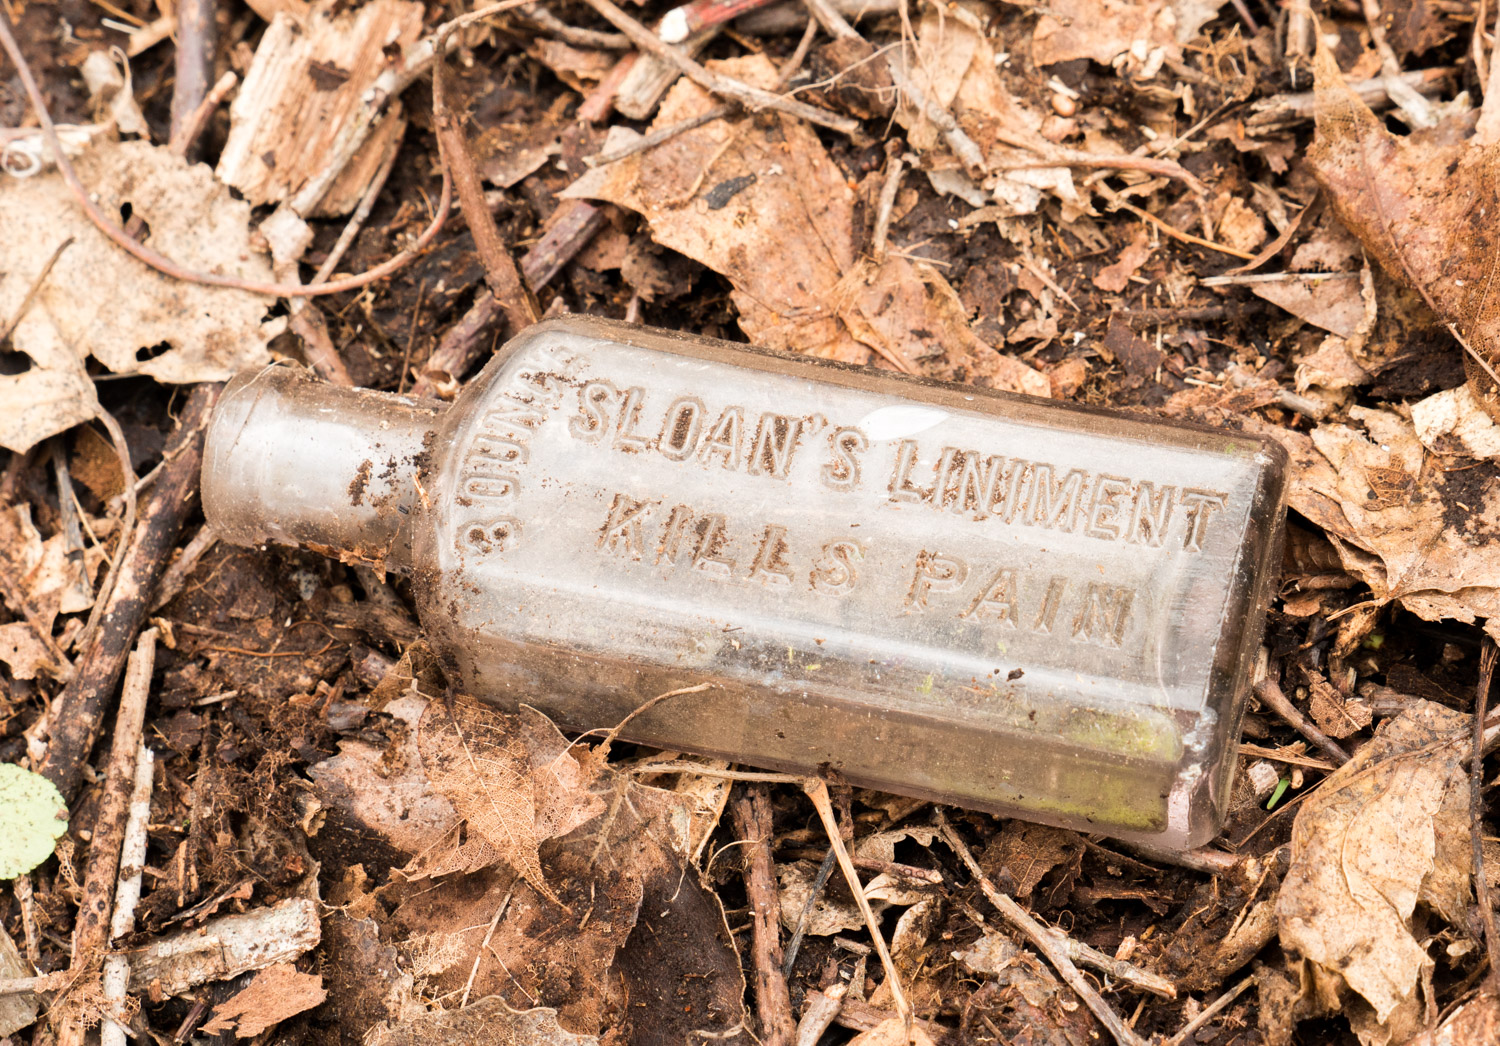 Antique bottle found at Mary Cummings Park